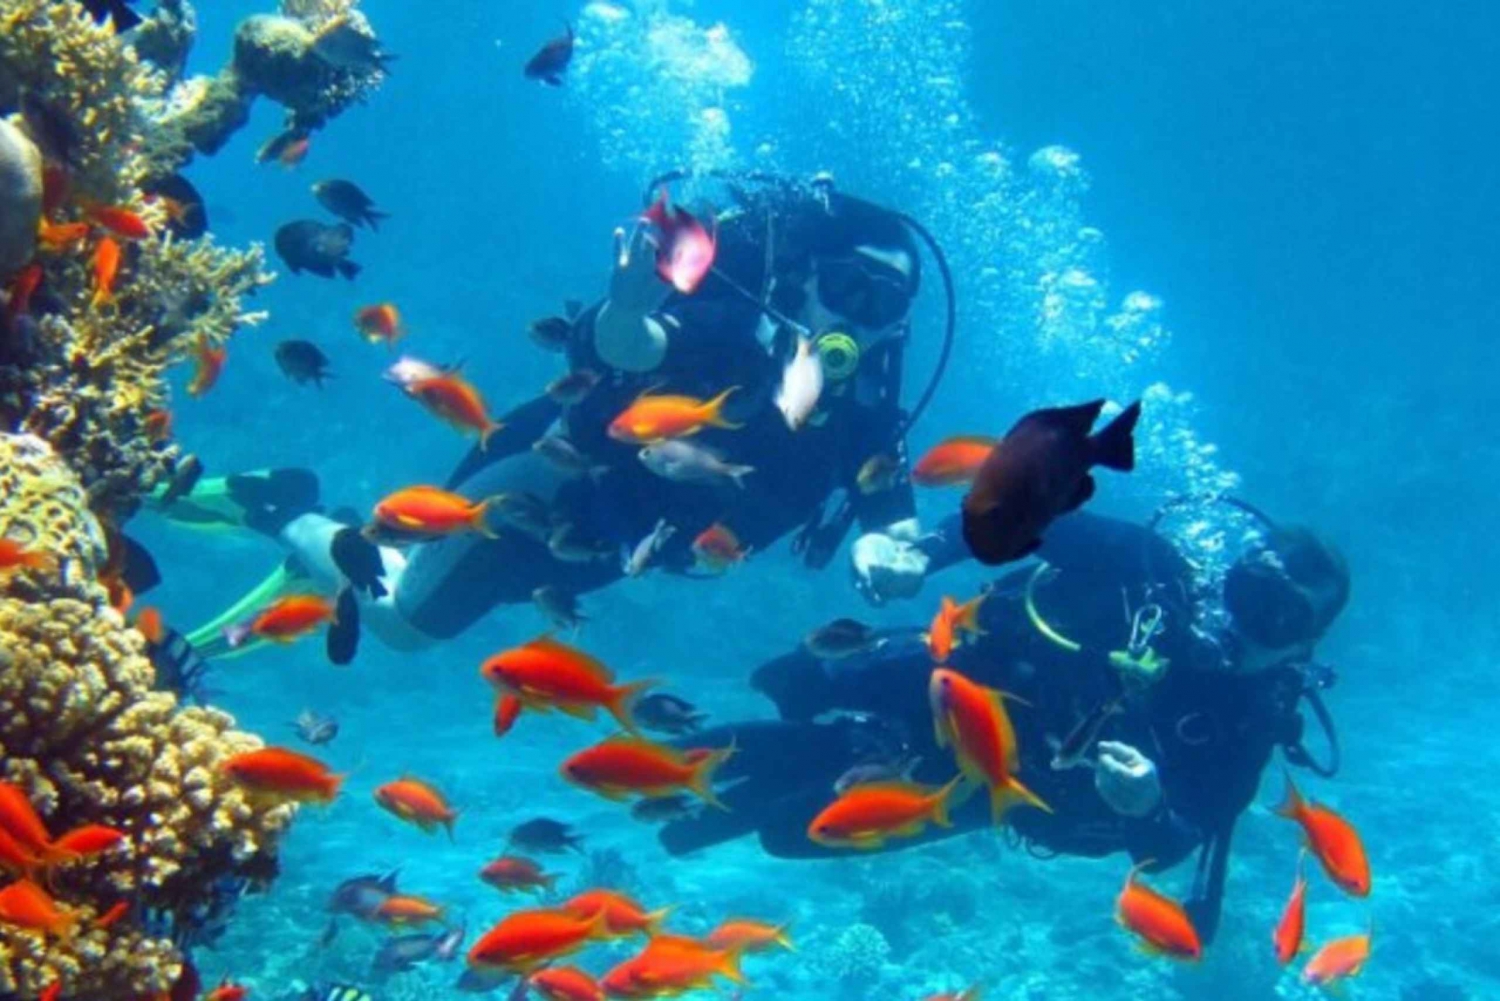 Maithon Private Island: Small Group Scuba Dive or Snorkeling